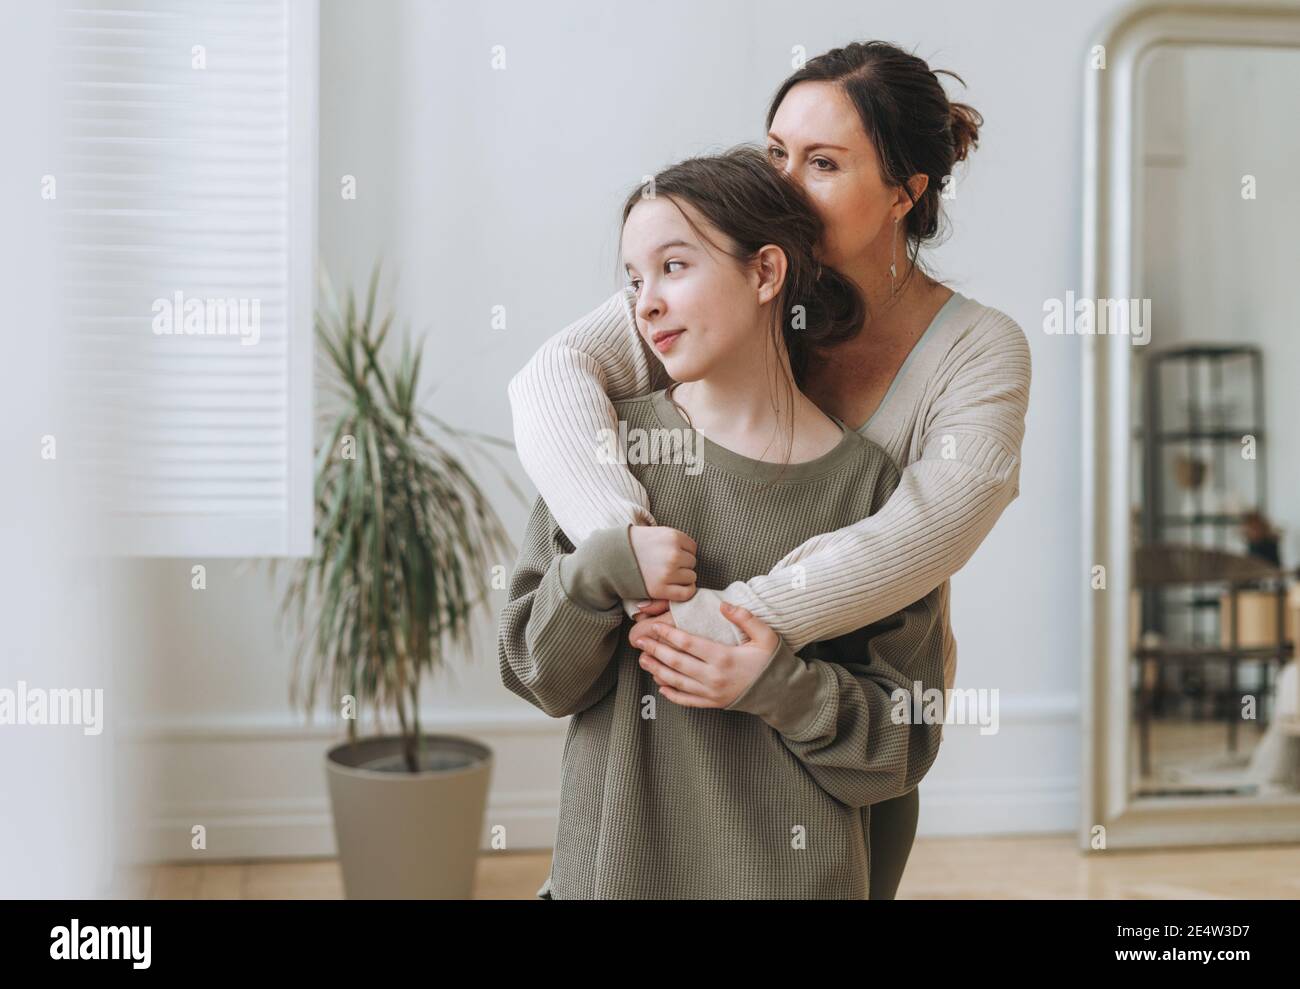 Portrait of mother middle age woman and daughter teenager together in light interior Stock Photo